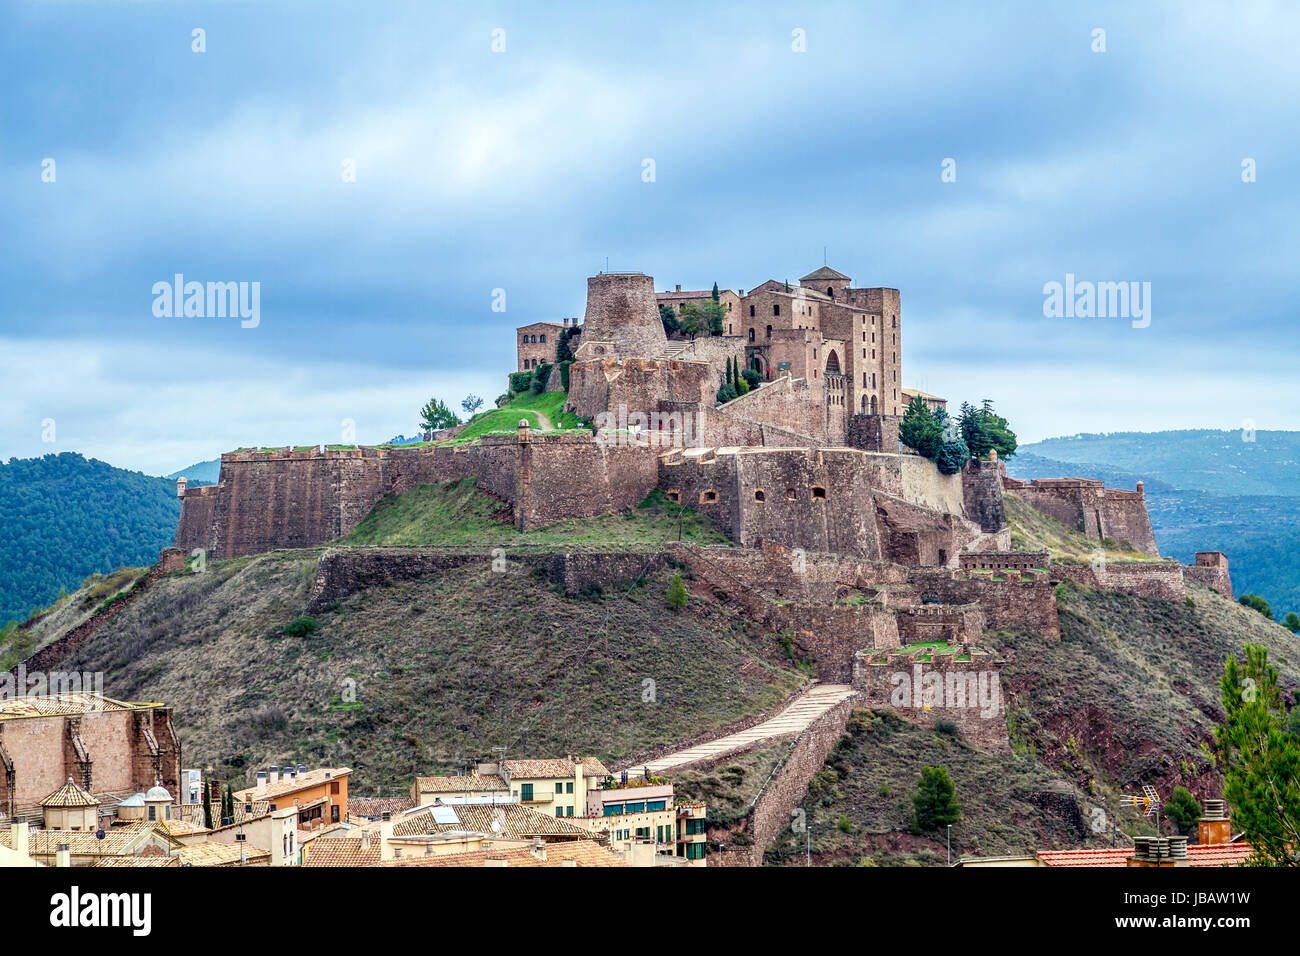 Cardona castle is a famous medieval castle in Catalonia. Now it is a famous state run hotel or 'parador'. Stock Photo